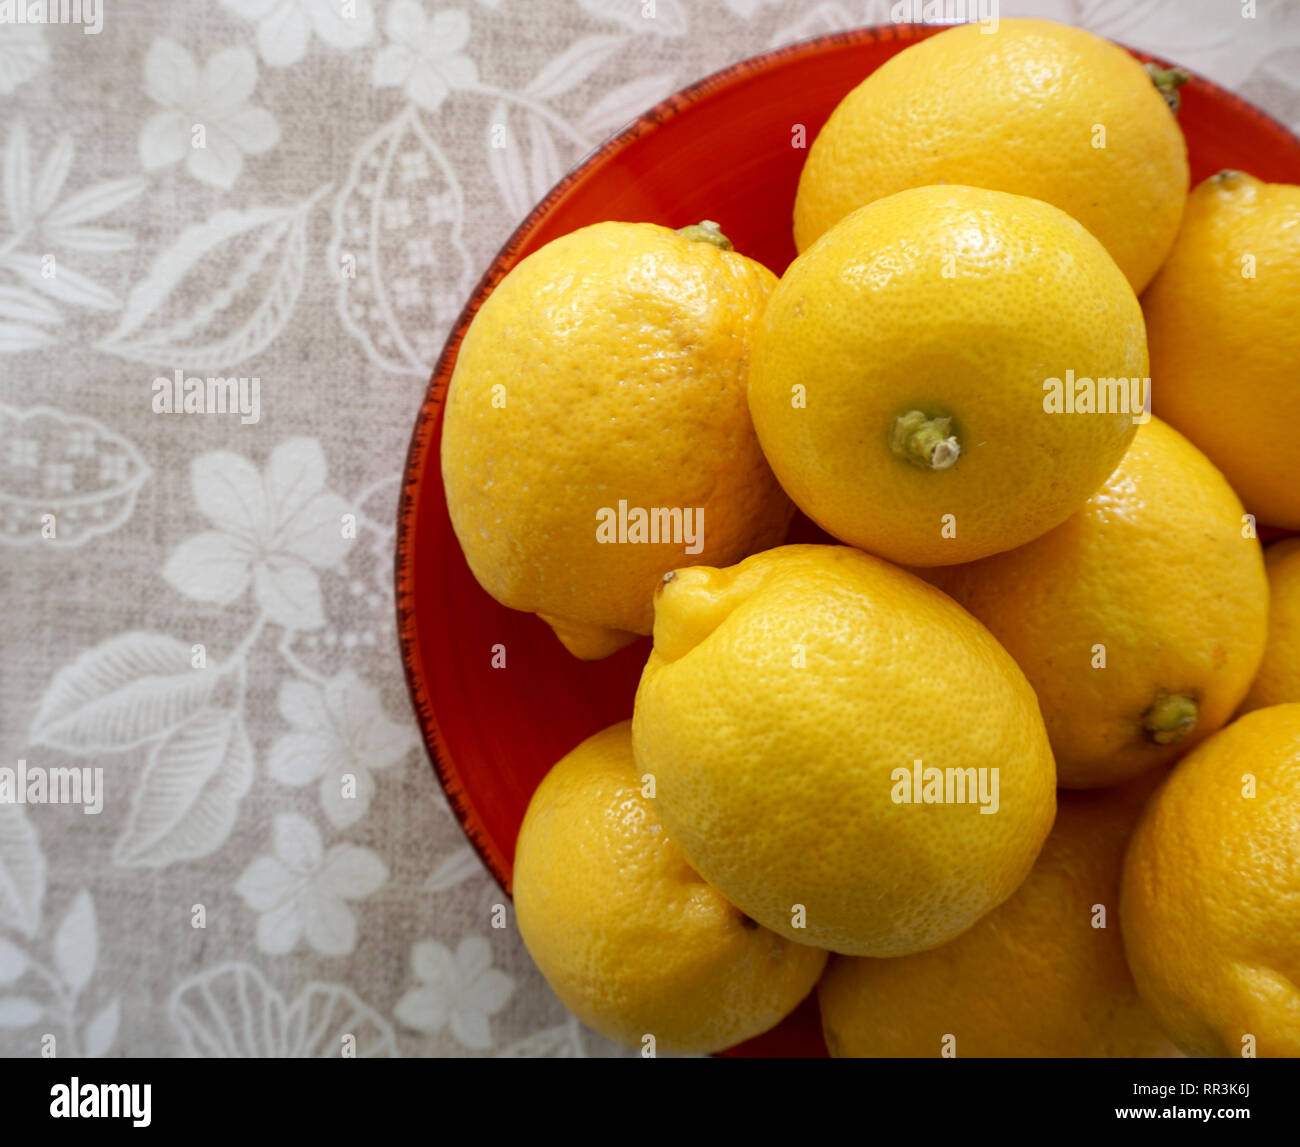 Many yellow lemons on the plate, top view. Citrus fruit with high vitamin C Stock Photo